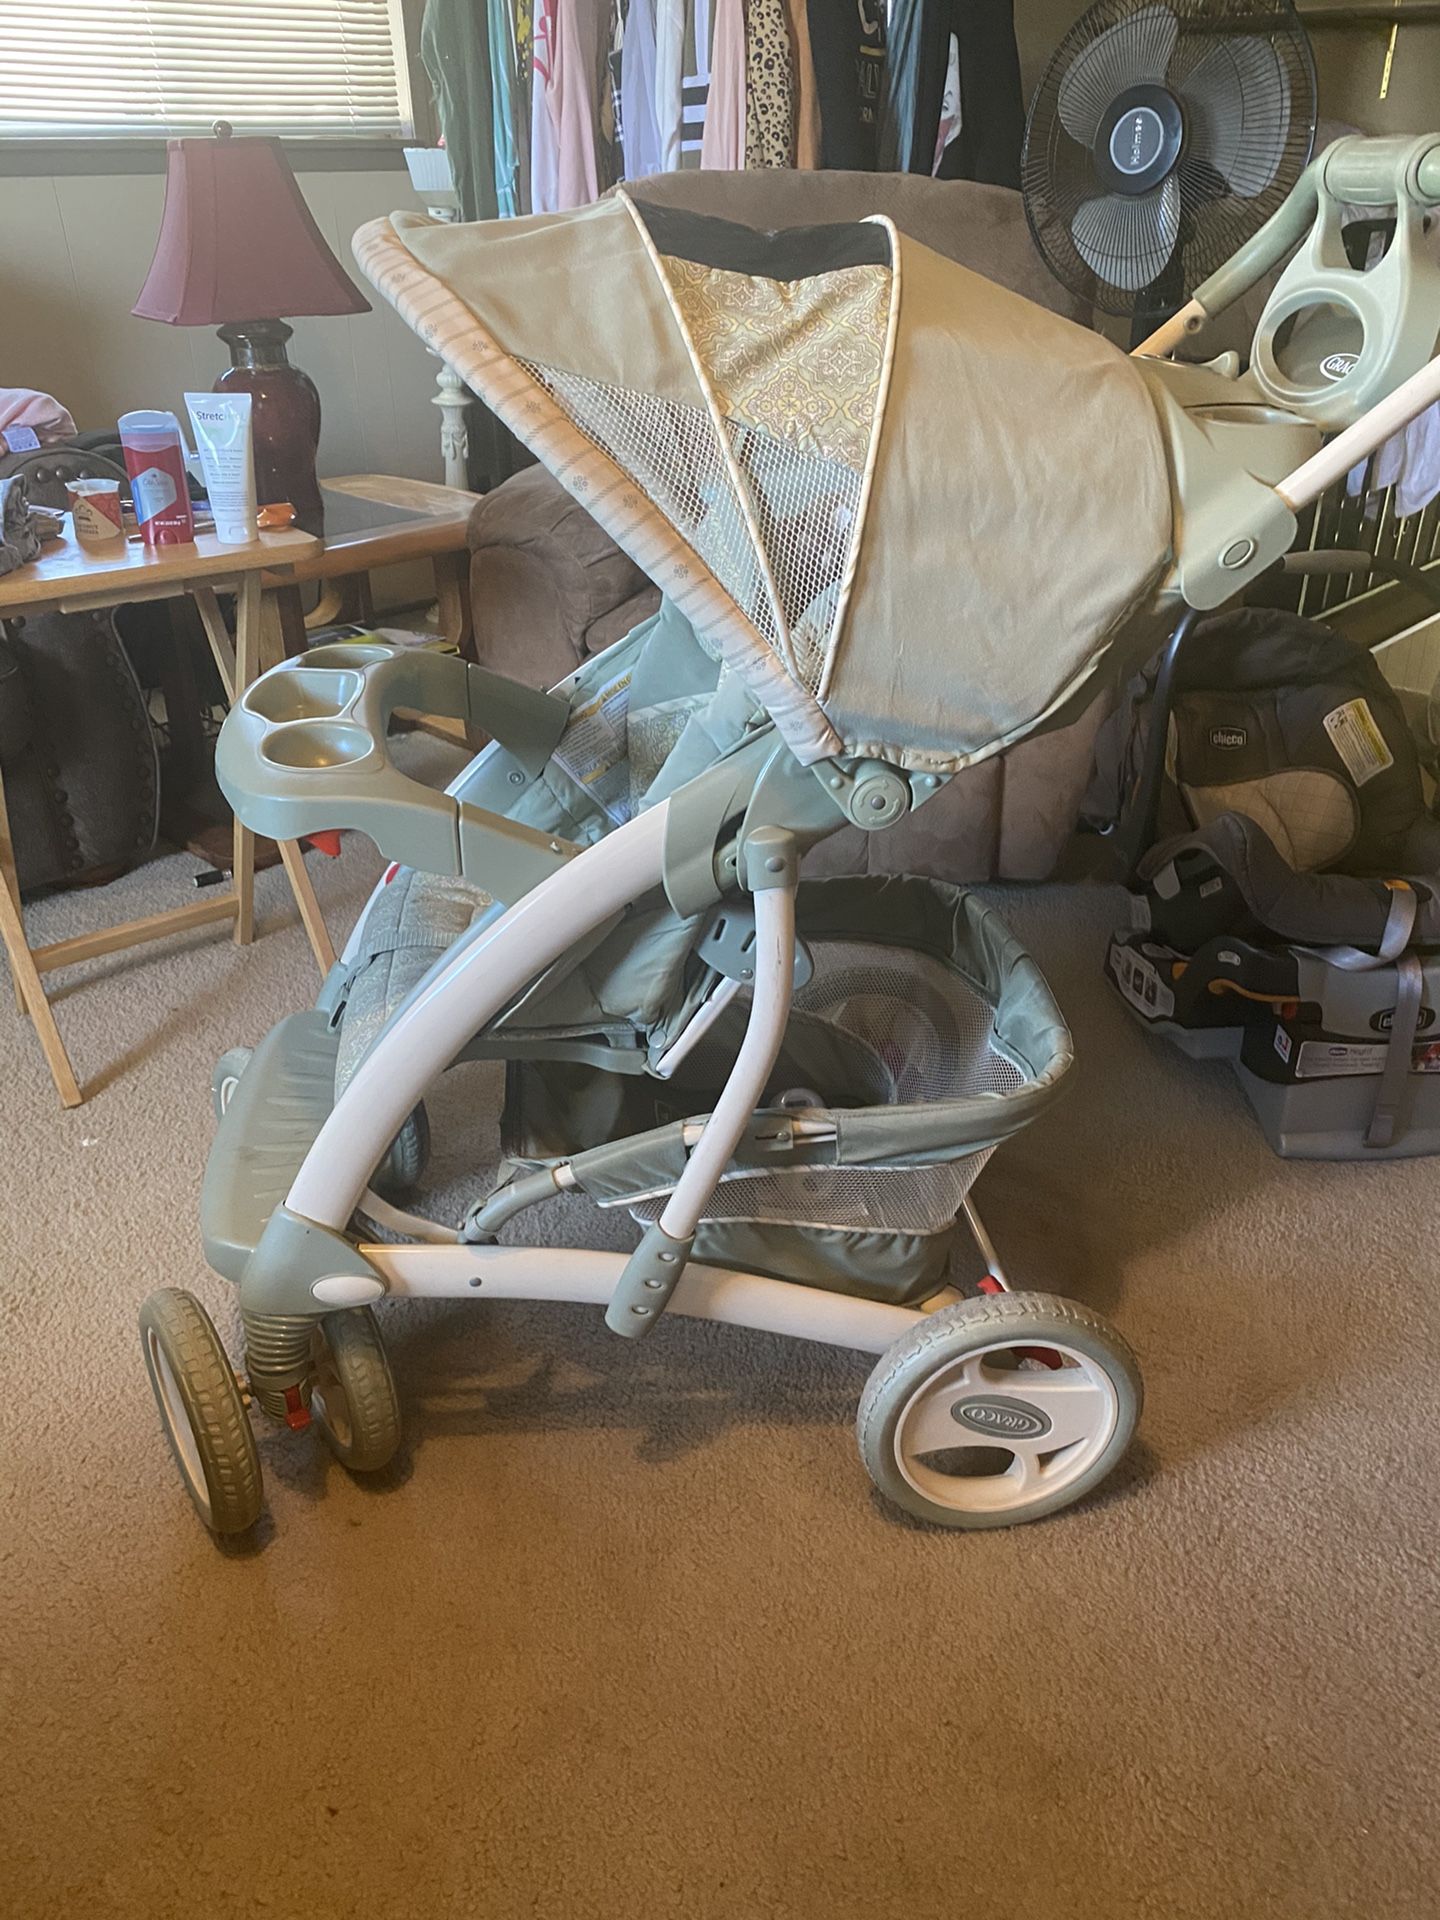 Graco stroller and car seat temperature control